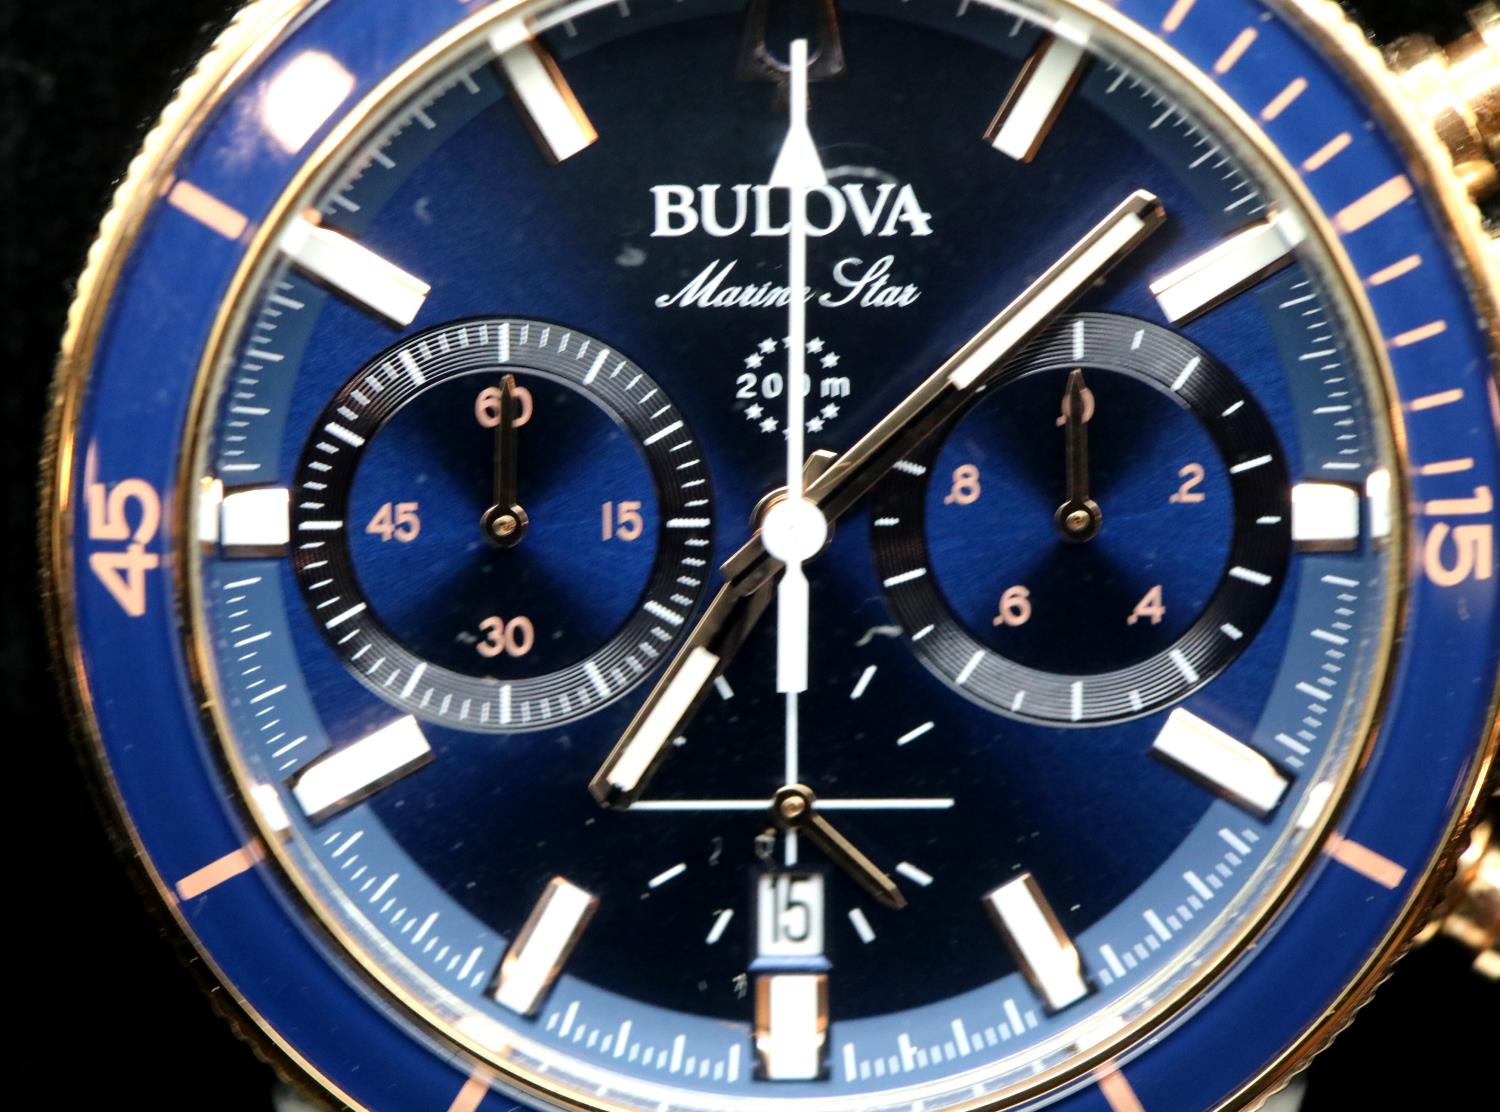 Gents Bulova Marine Star 200 wristwatch. P&P Group 1 (£14+VAT for the first lot and £1+VAT for - Image 2 of 3